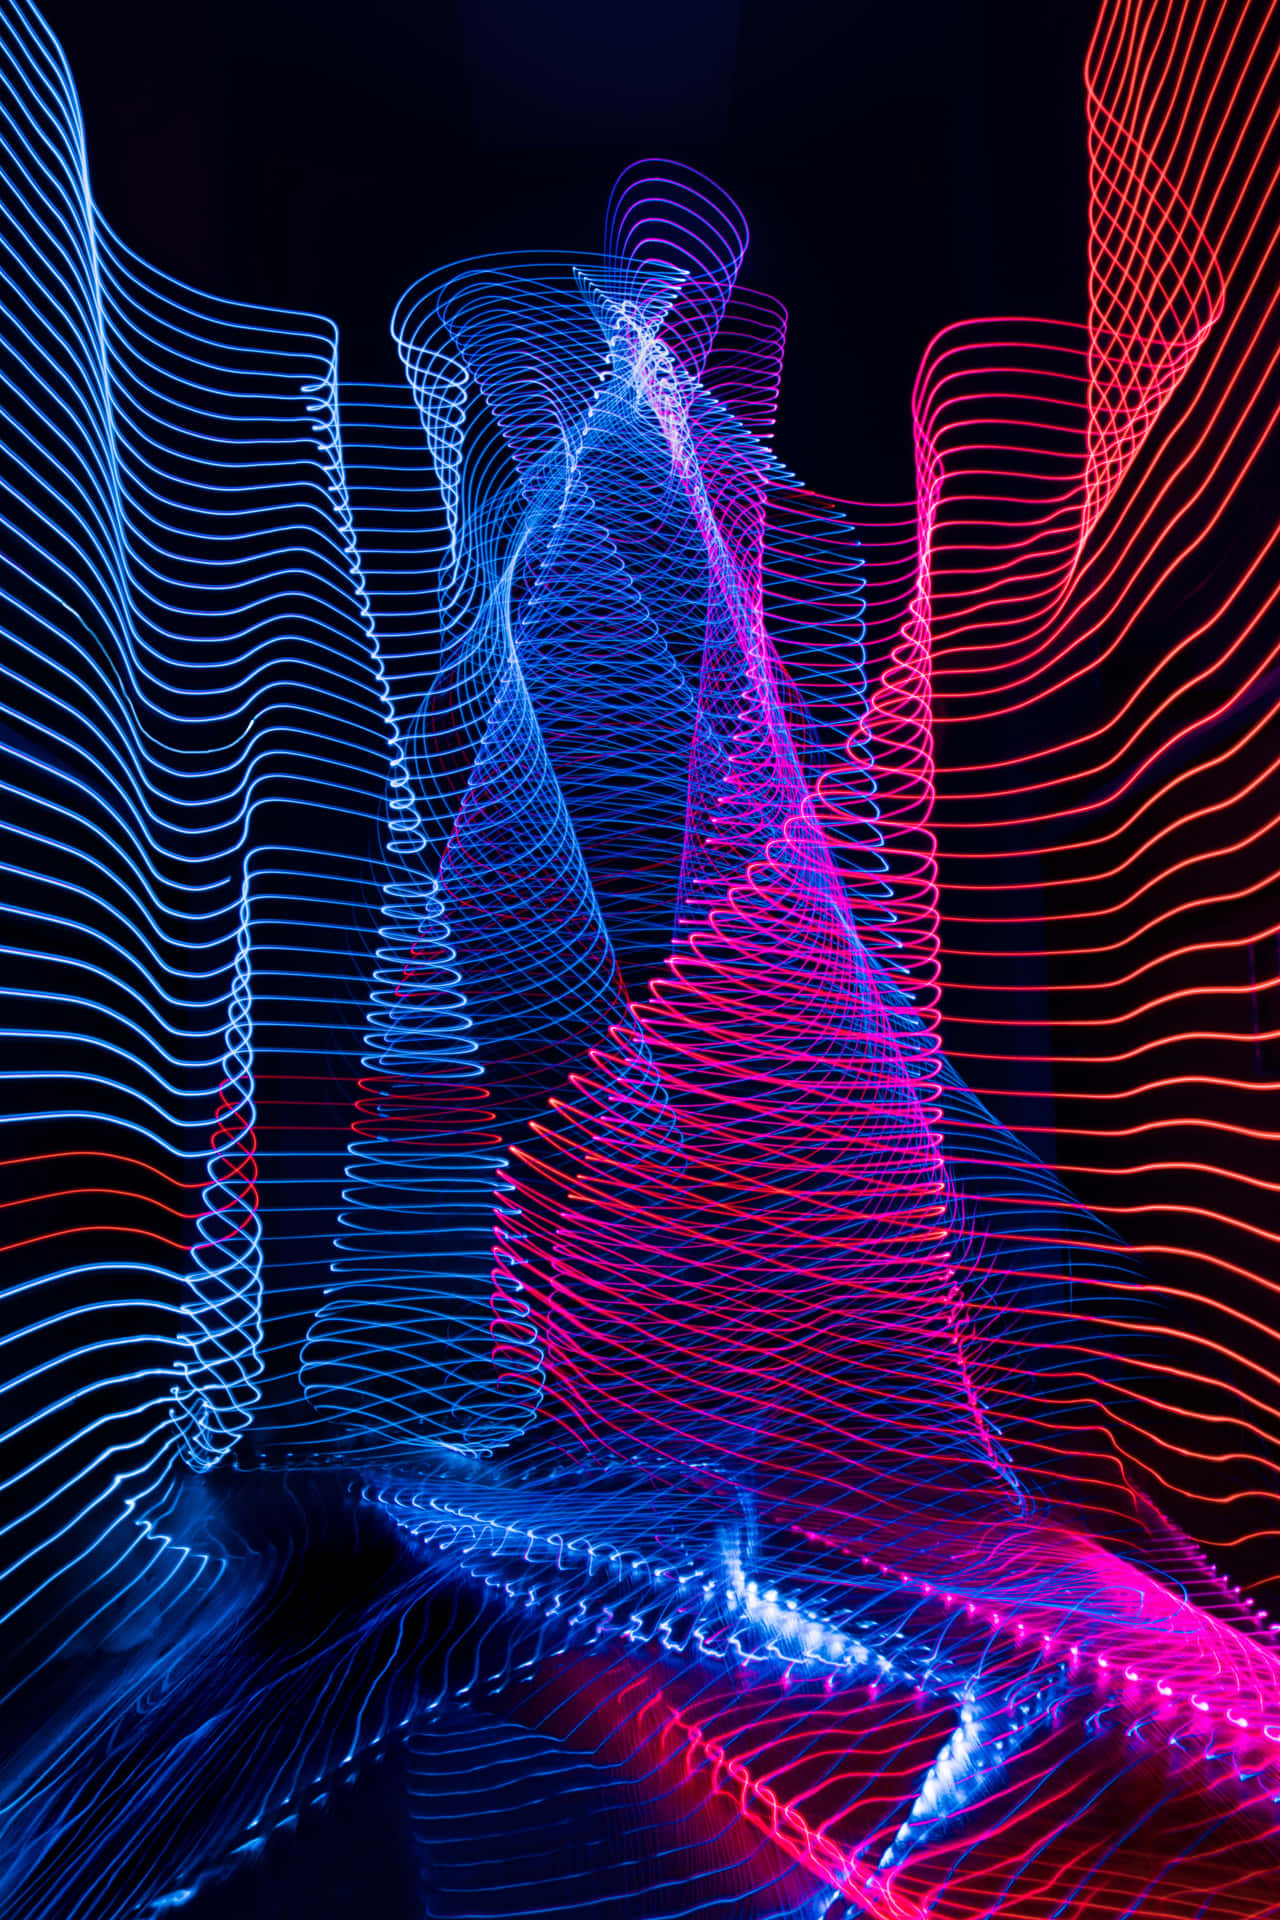 A Colorful Light Art Image With A Dark Background Background